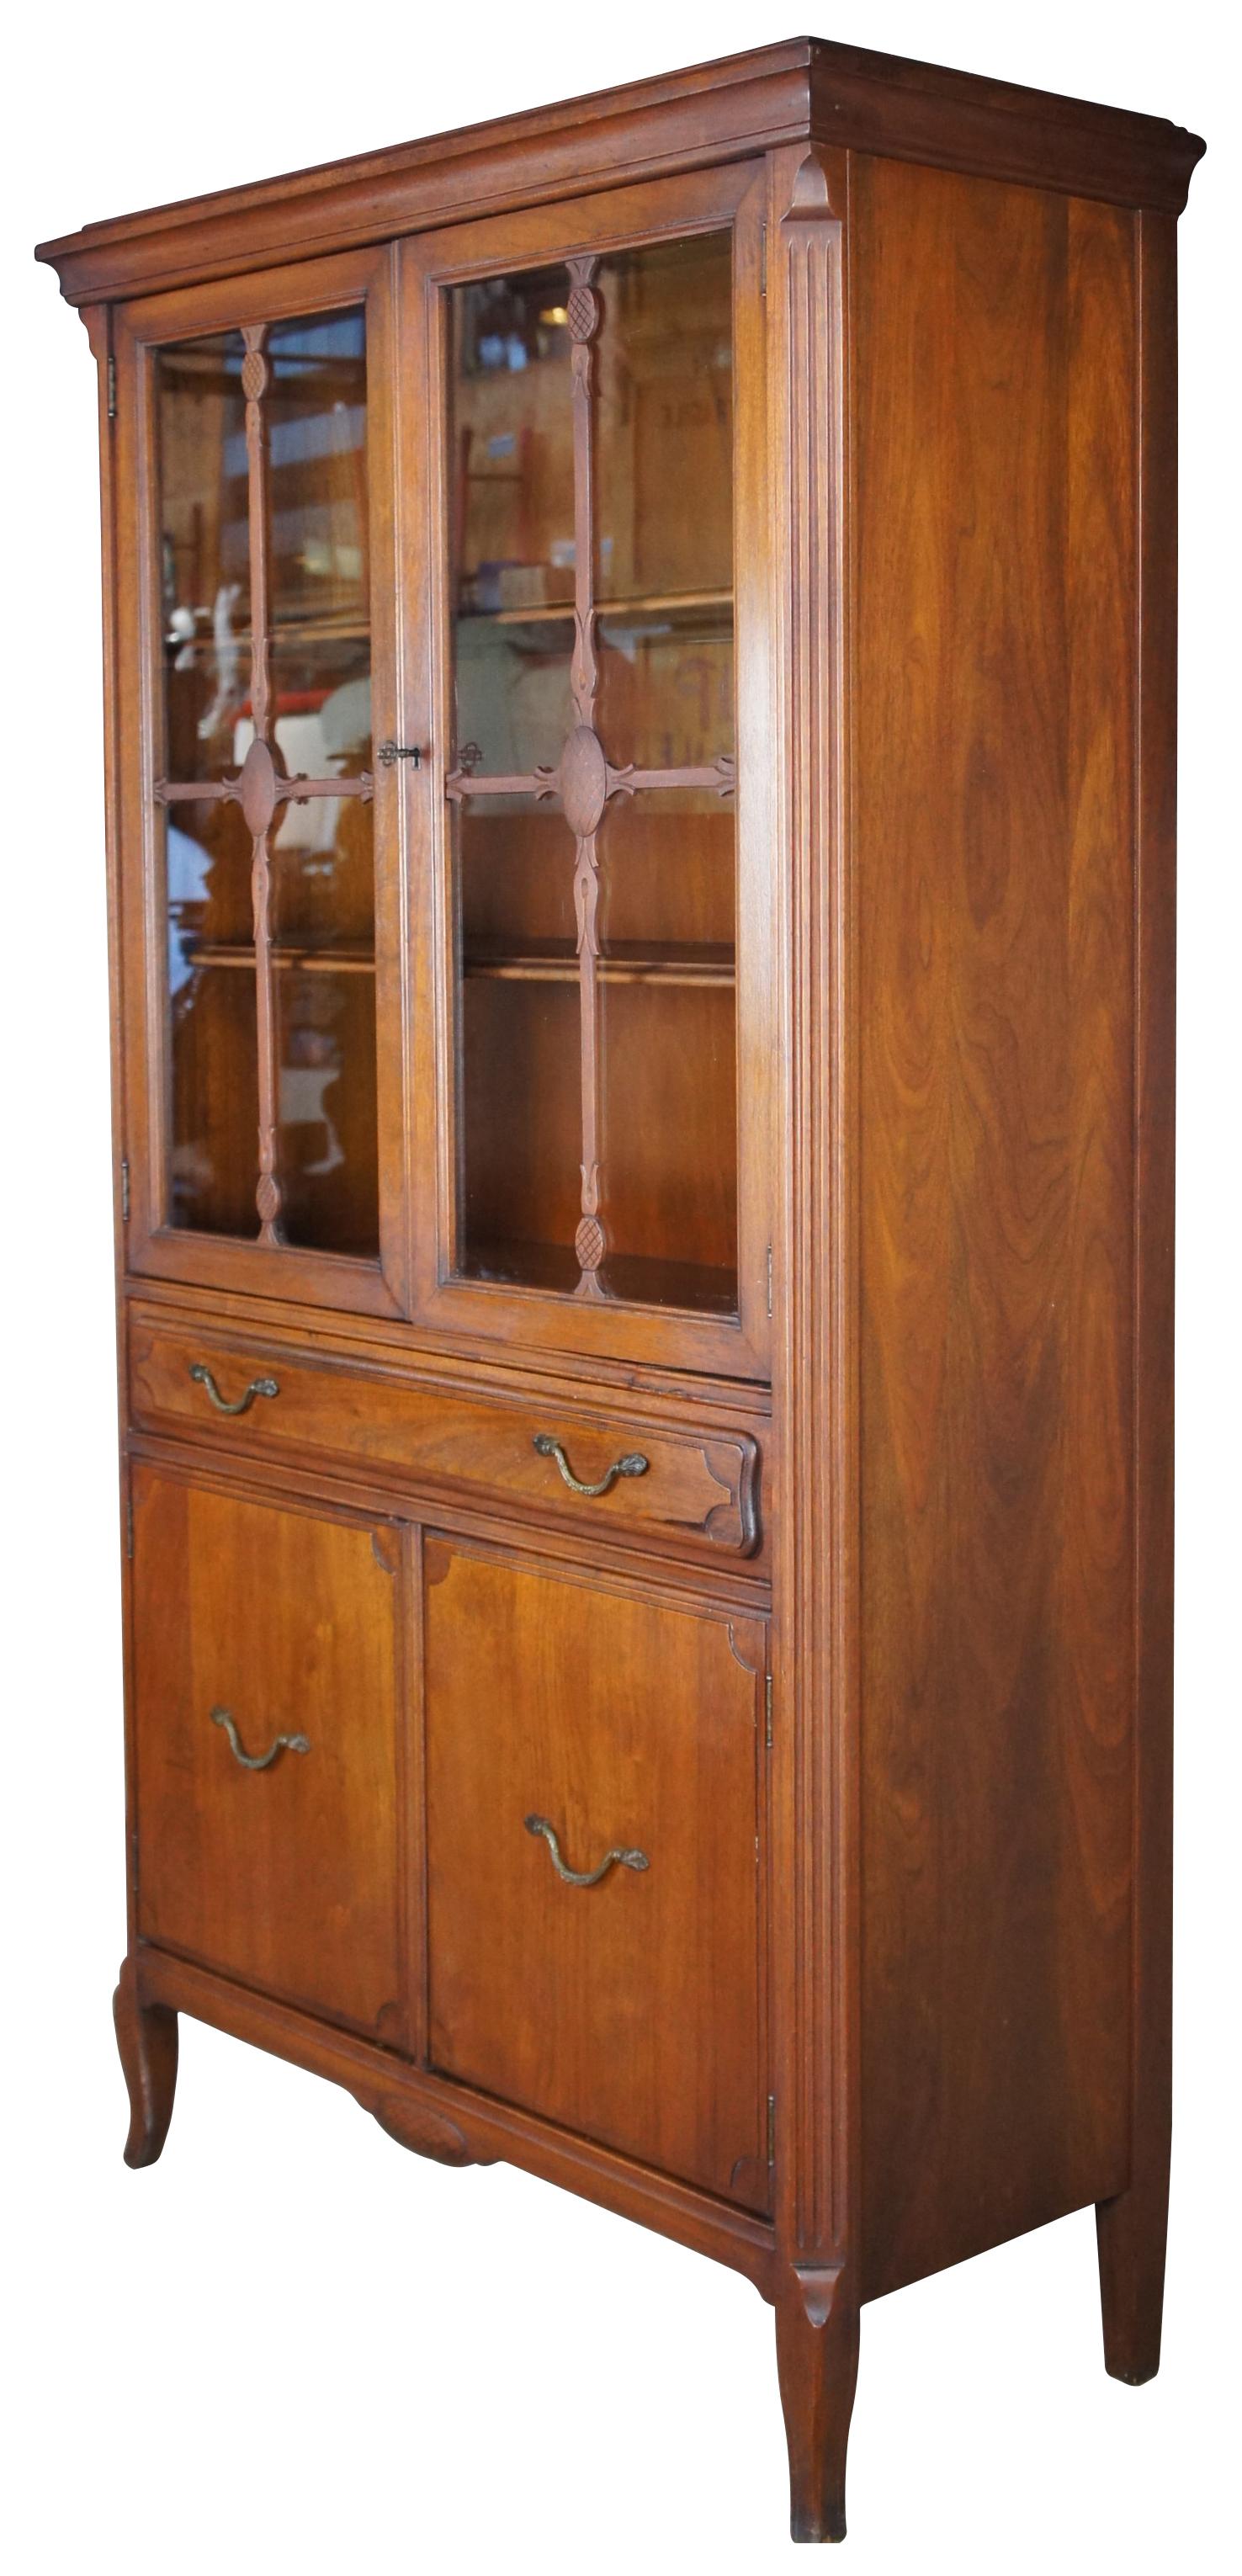 An Early 20th Century American display cabinet.  Made of walnut with rectangular form that features an upper cabinet with pineapple style lattice doors over one drawer and lower cabinet.  Includes Chamfered fluted stiles terminating into rams